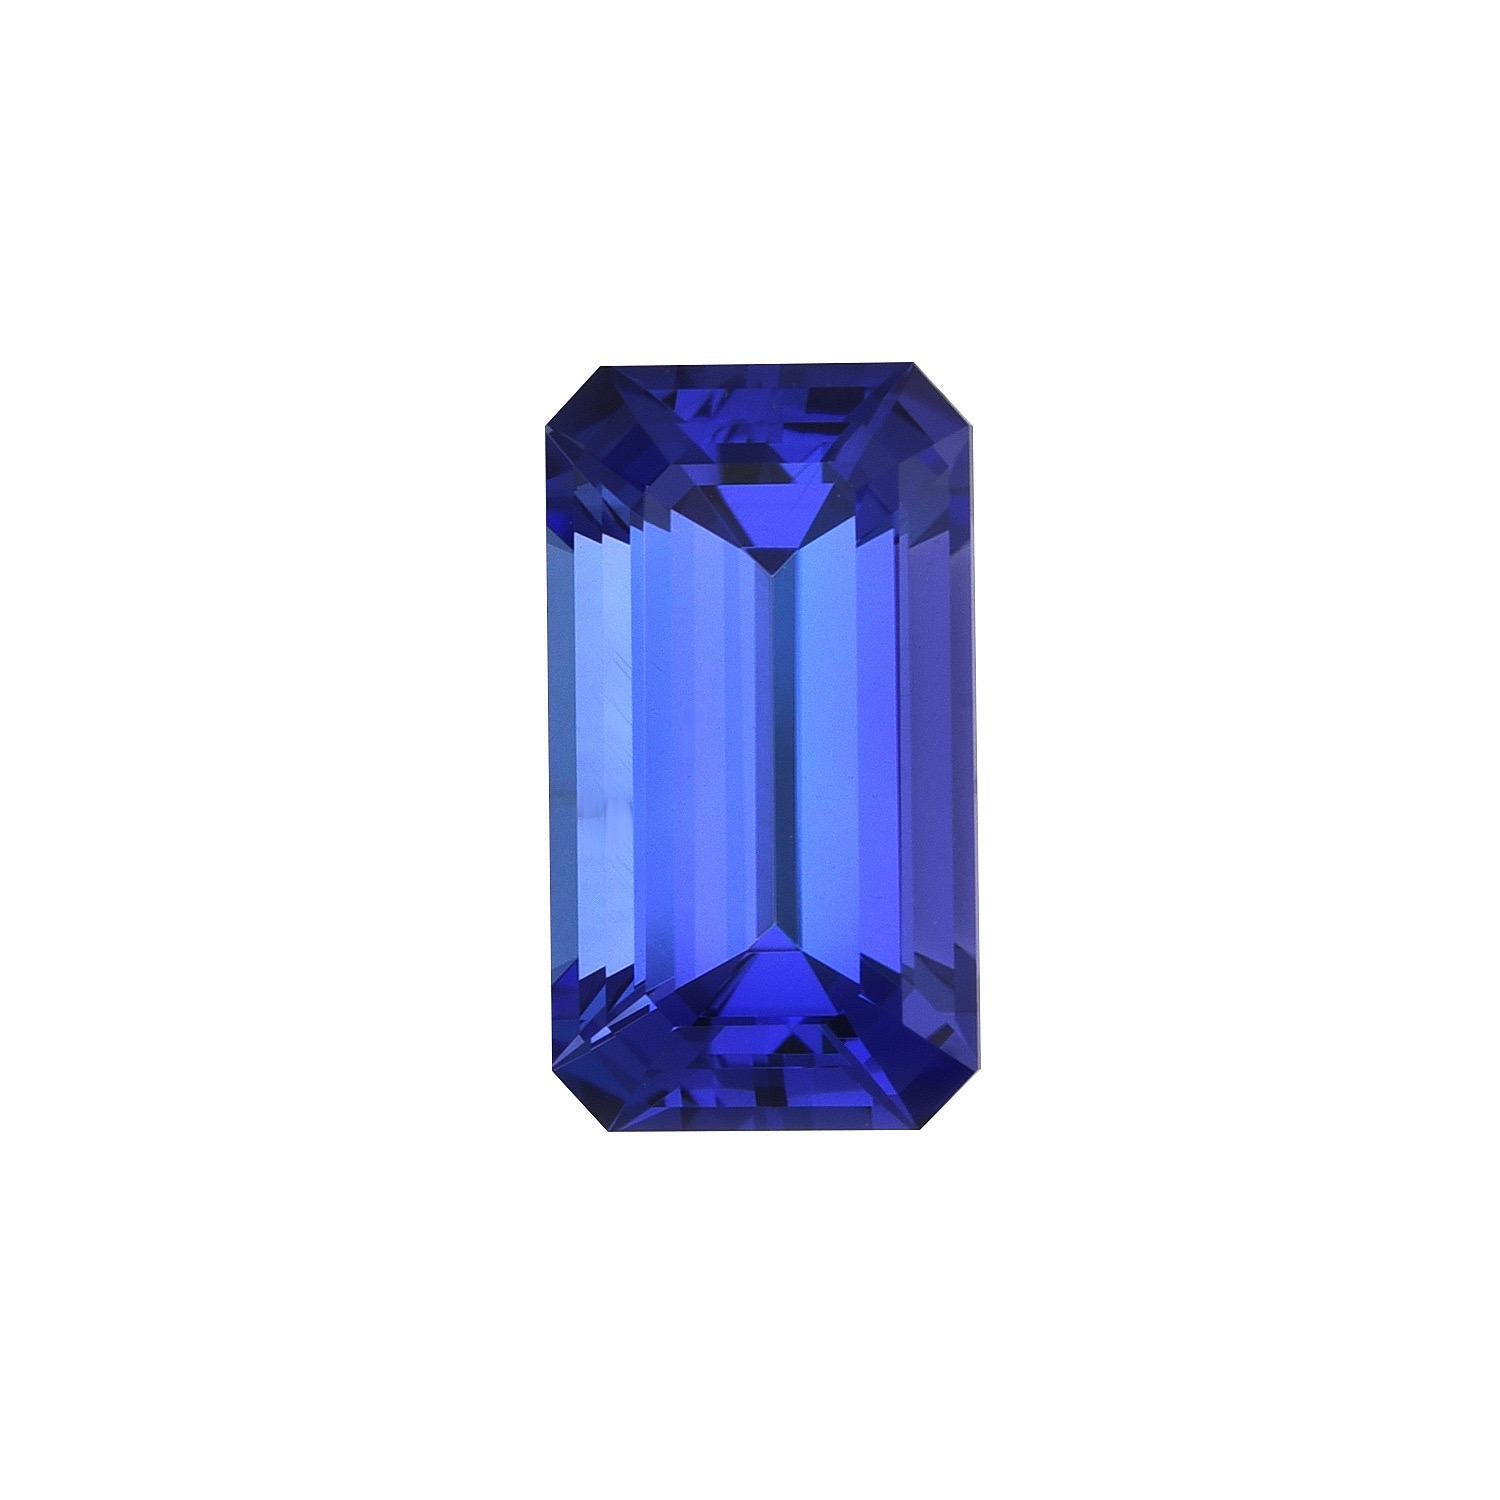 Elongated 2.52 carat Tanzanite Emerald-Cut loose gemstone, offered unmounted to someone special.
Dimensions: 10.5 x 5.9 x 4.6 mm.
Returns are accepted and paid by us within 7 days of delivery.
We offer supreme custom jewelry work upon request.